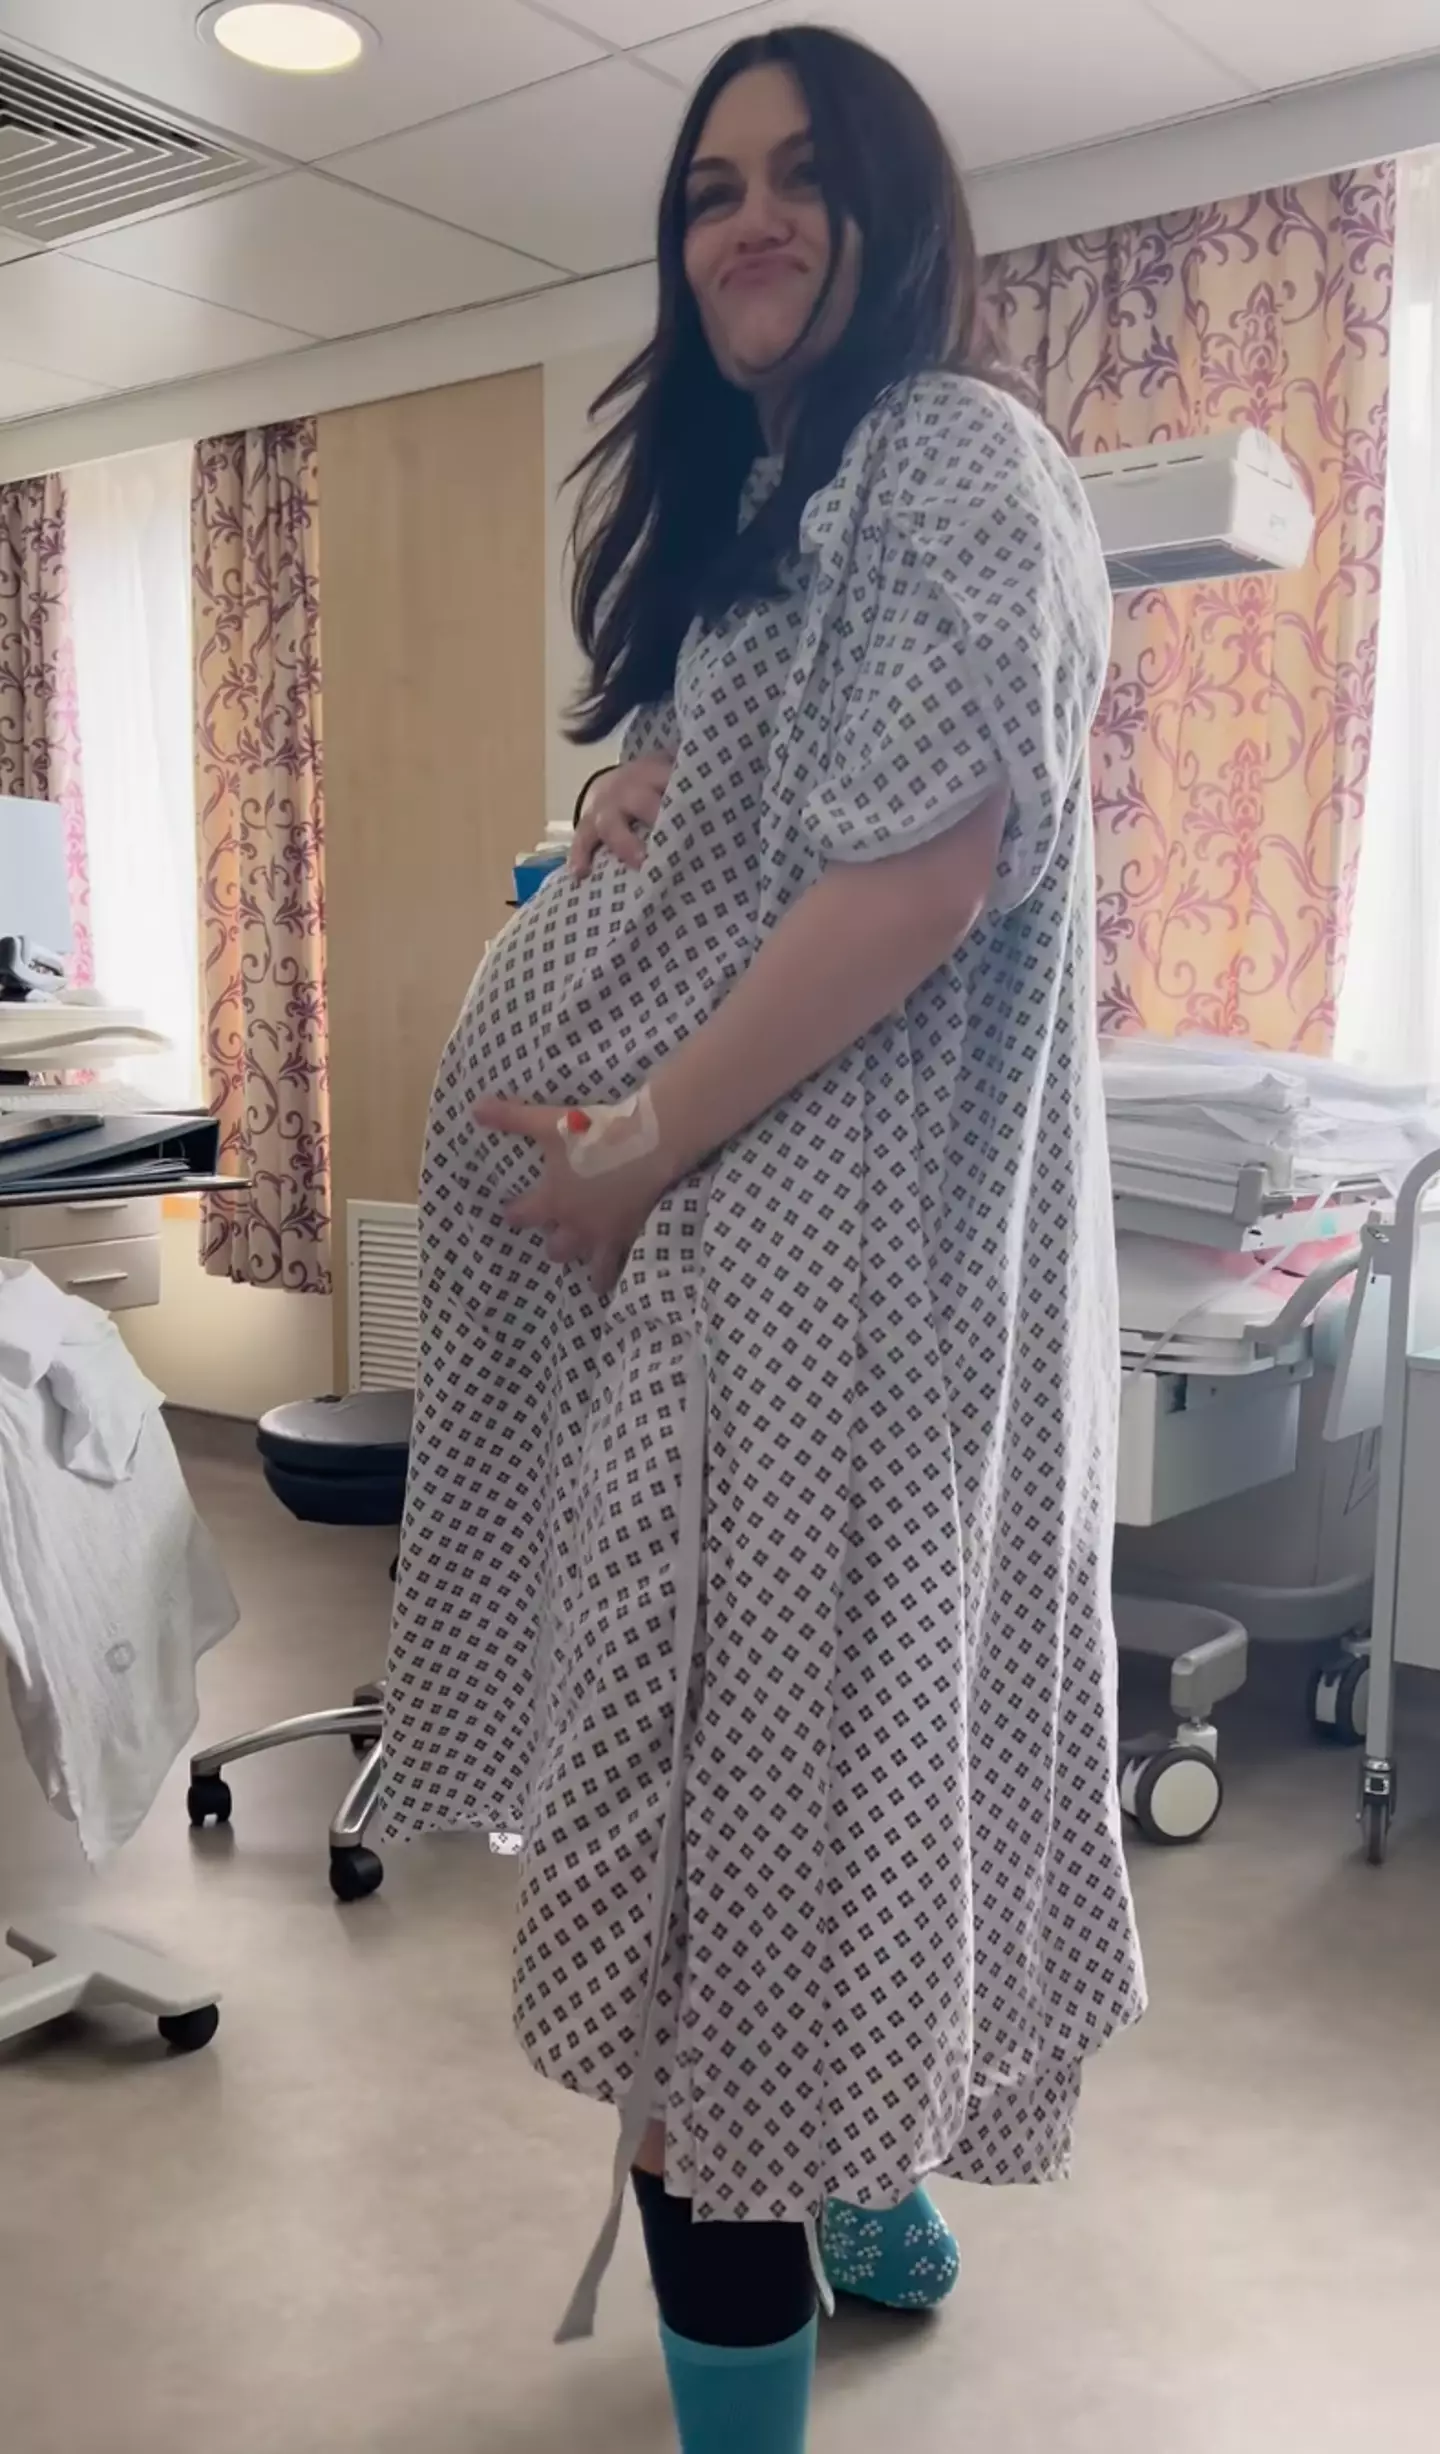 Jessie J shared a video of herself dancing shortly before having her C-section.